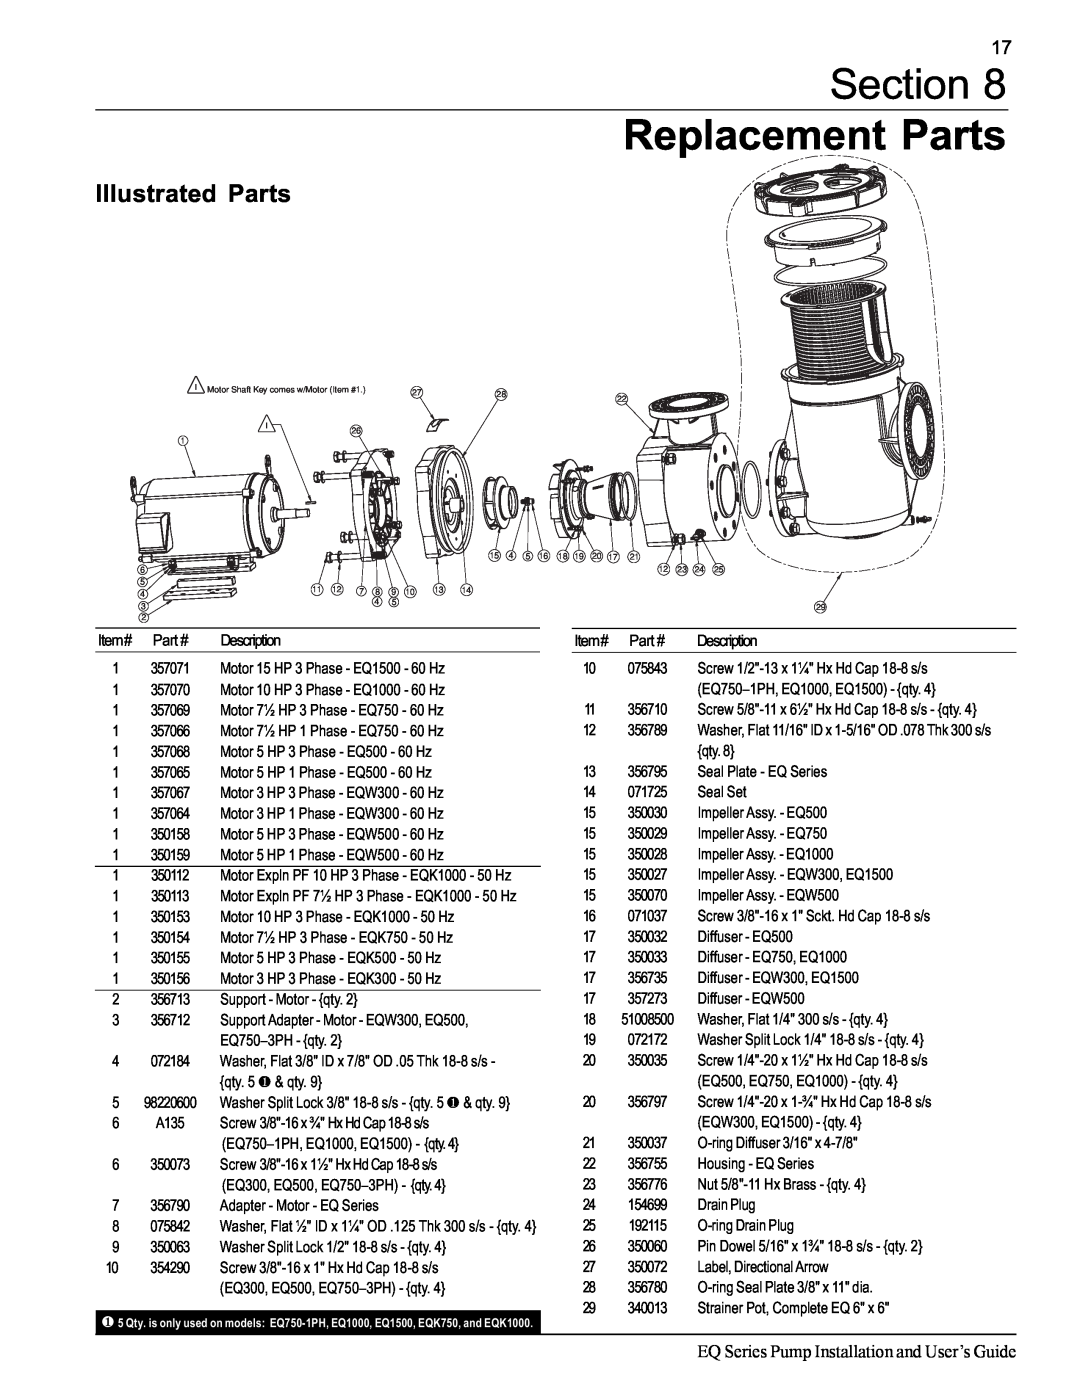 Pentair EQ SERIES Section Replacement Parts, Illustrated Parts, EQ Series Pump Installation and User’s Guide 